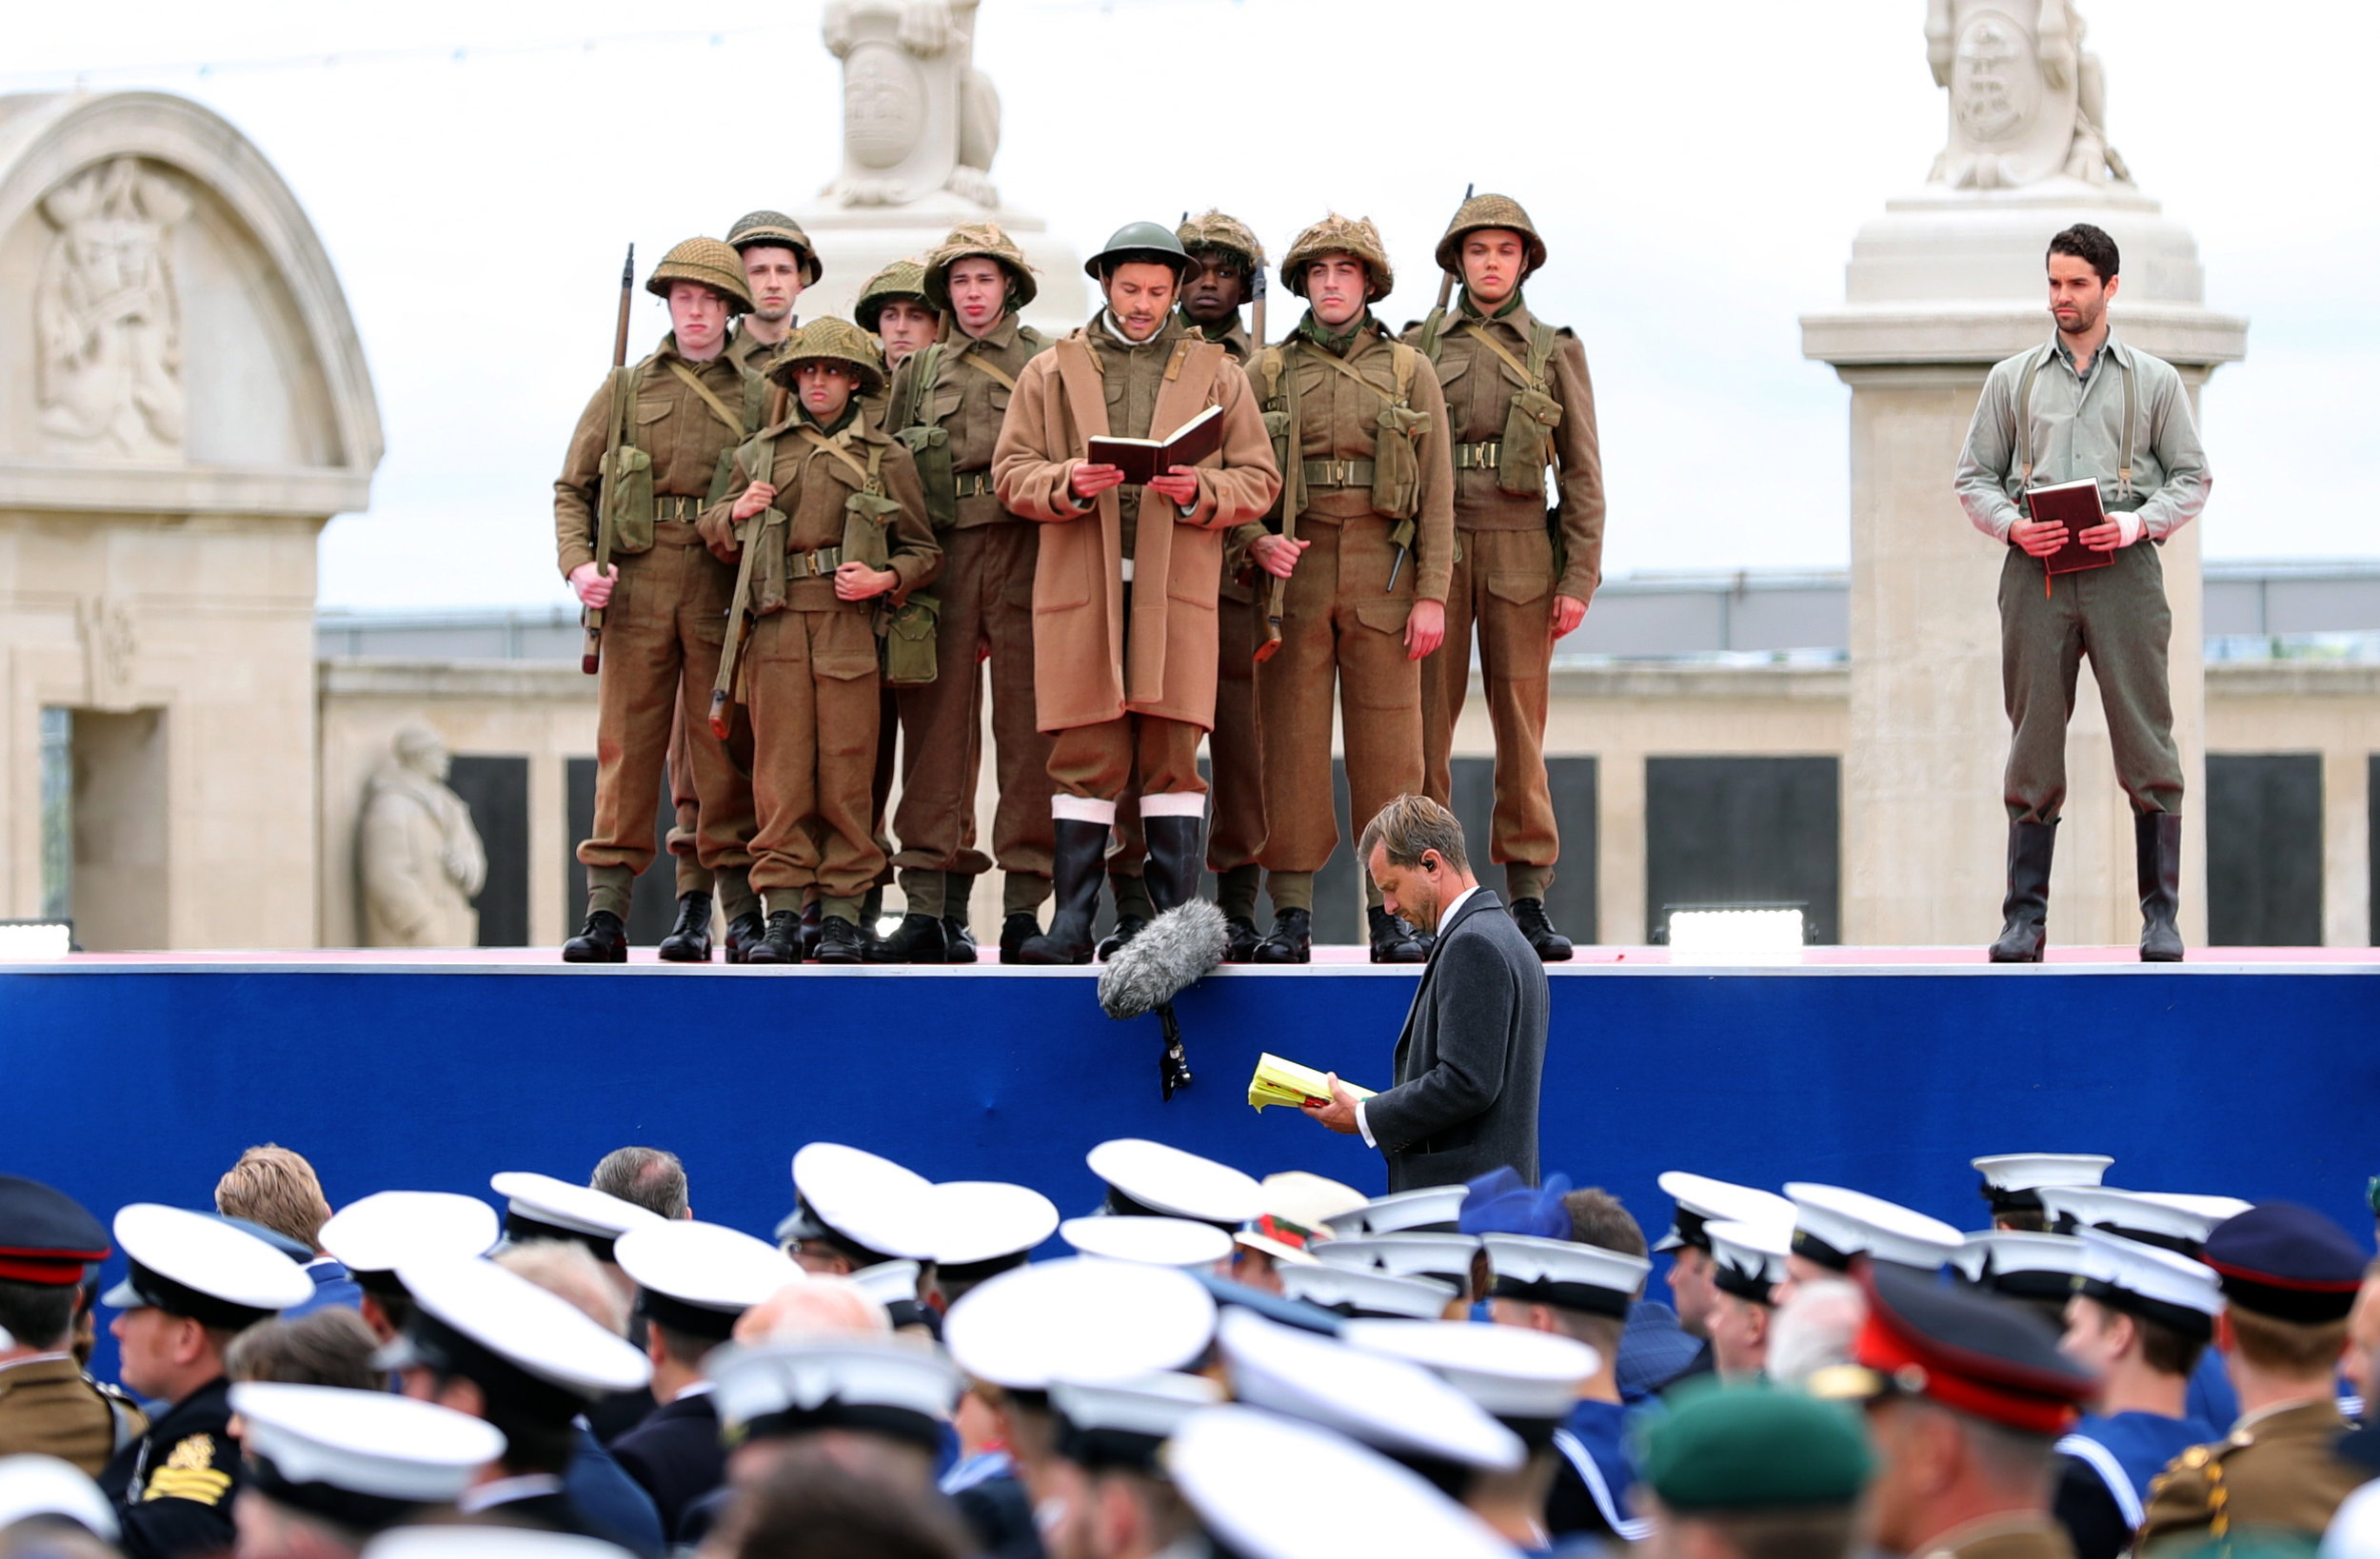 Portsmouth D-Day Commemorations in Pictures11.jpg